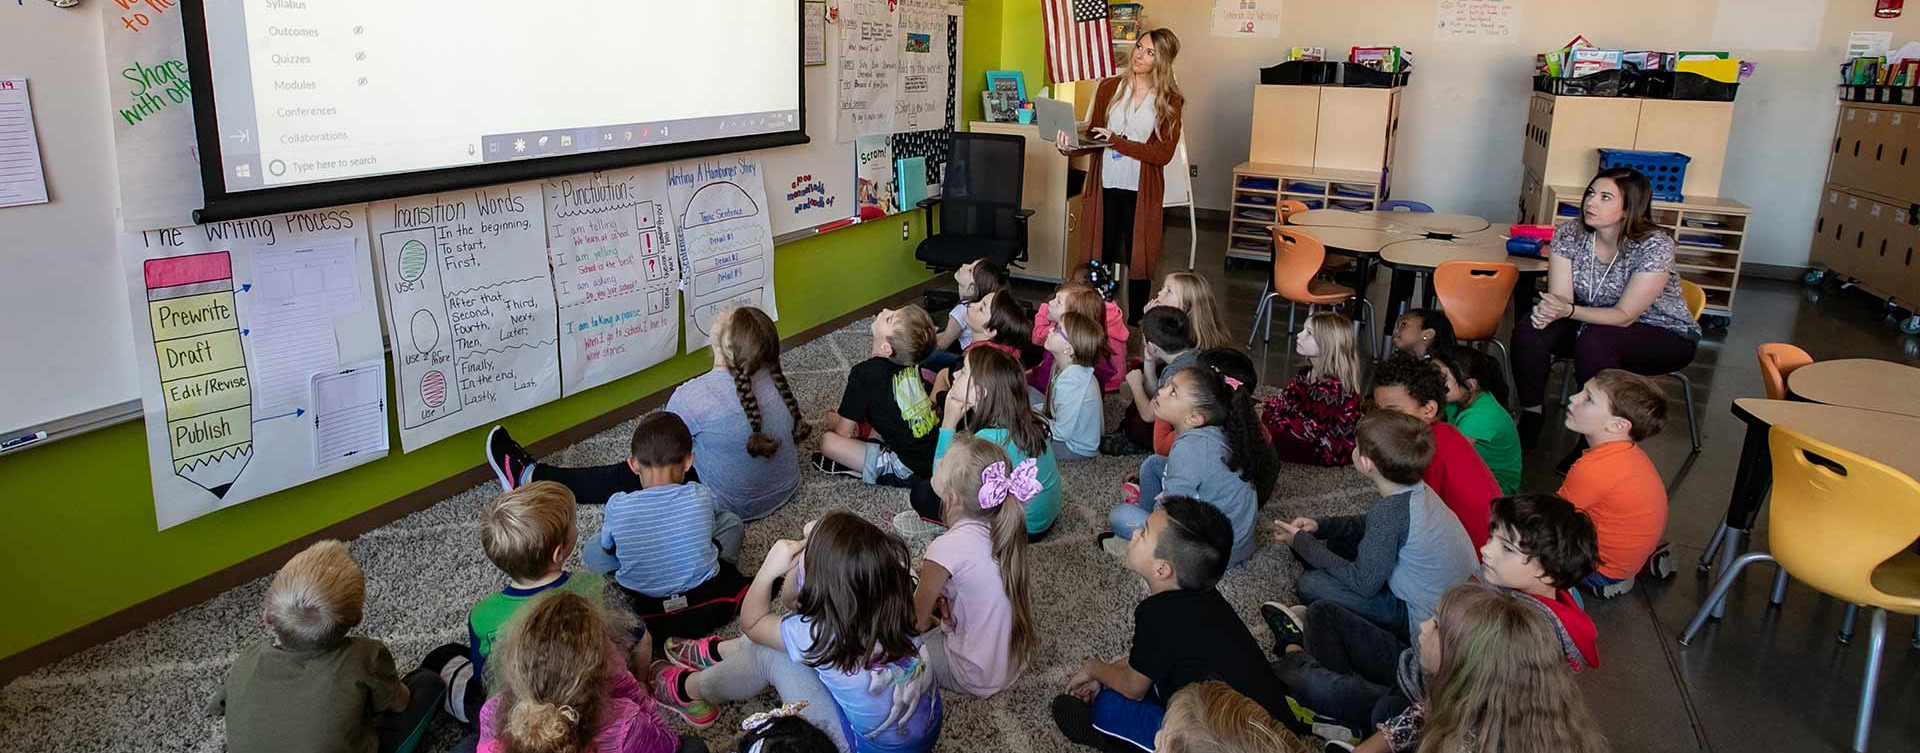 Students learning in a Missouri classroom. photo credit Missouri State University